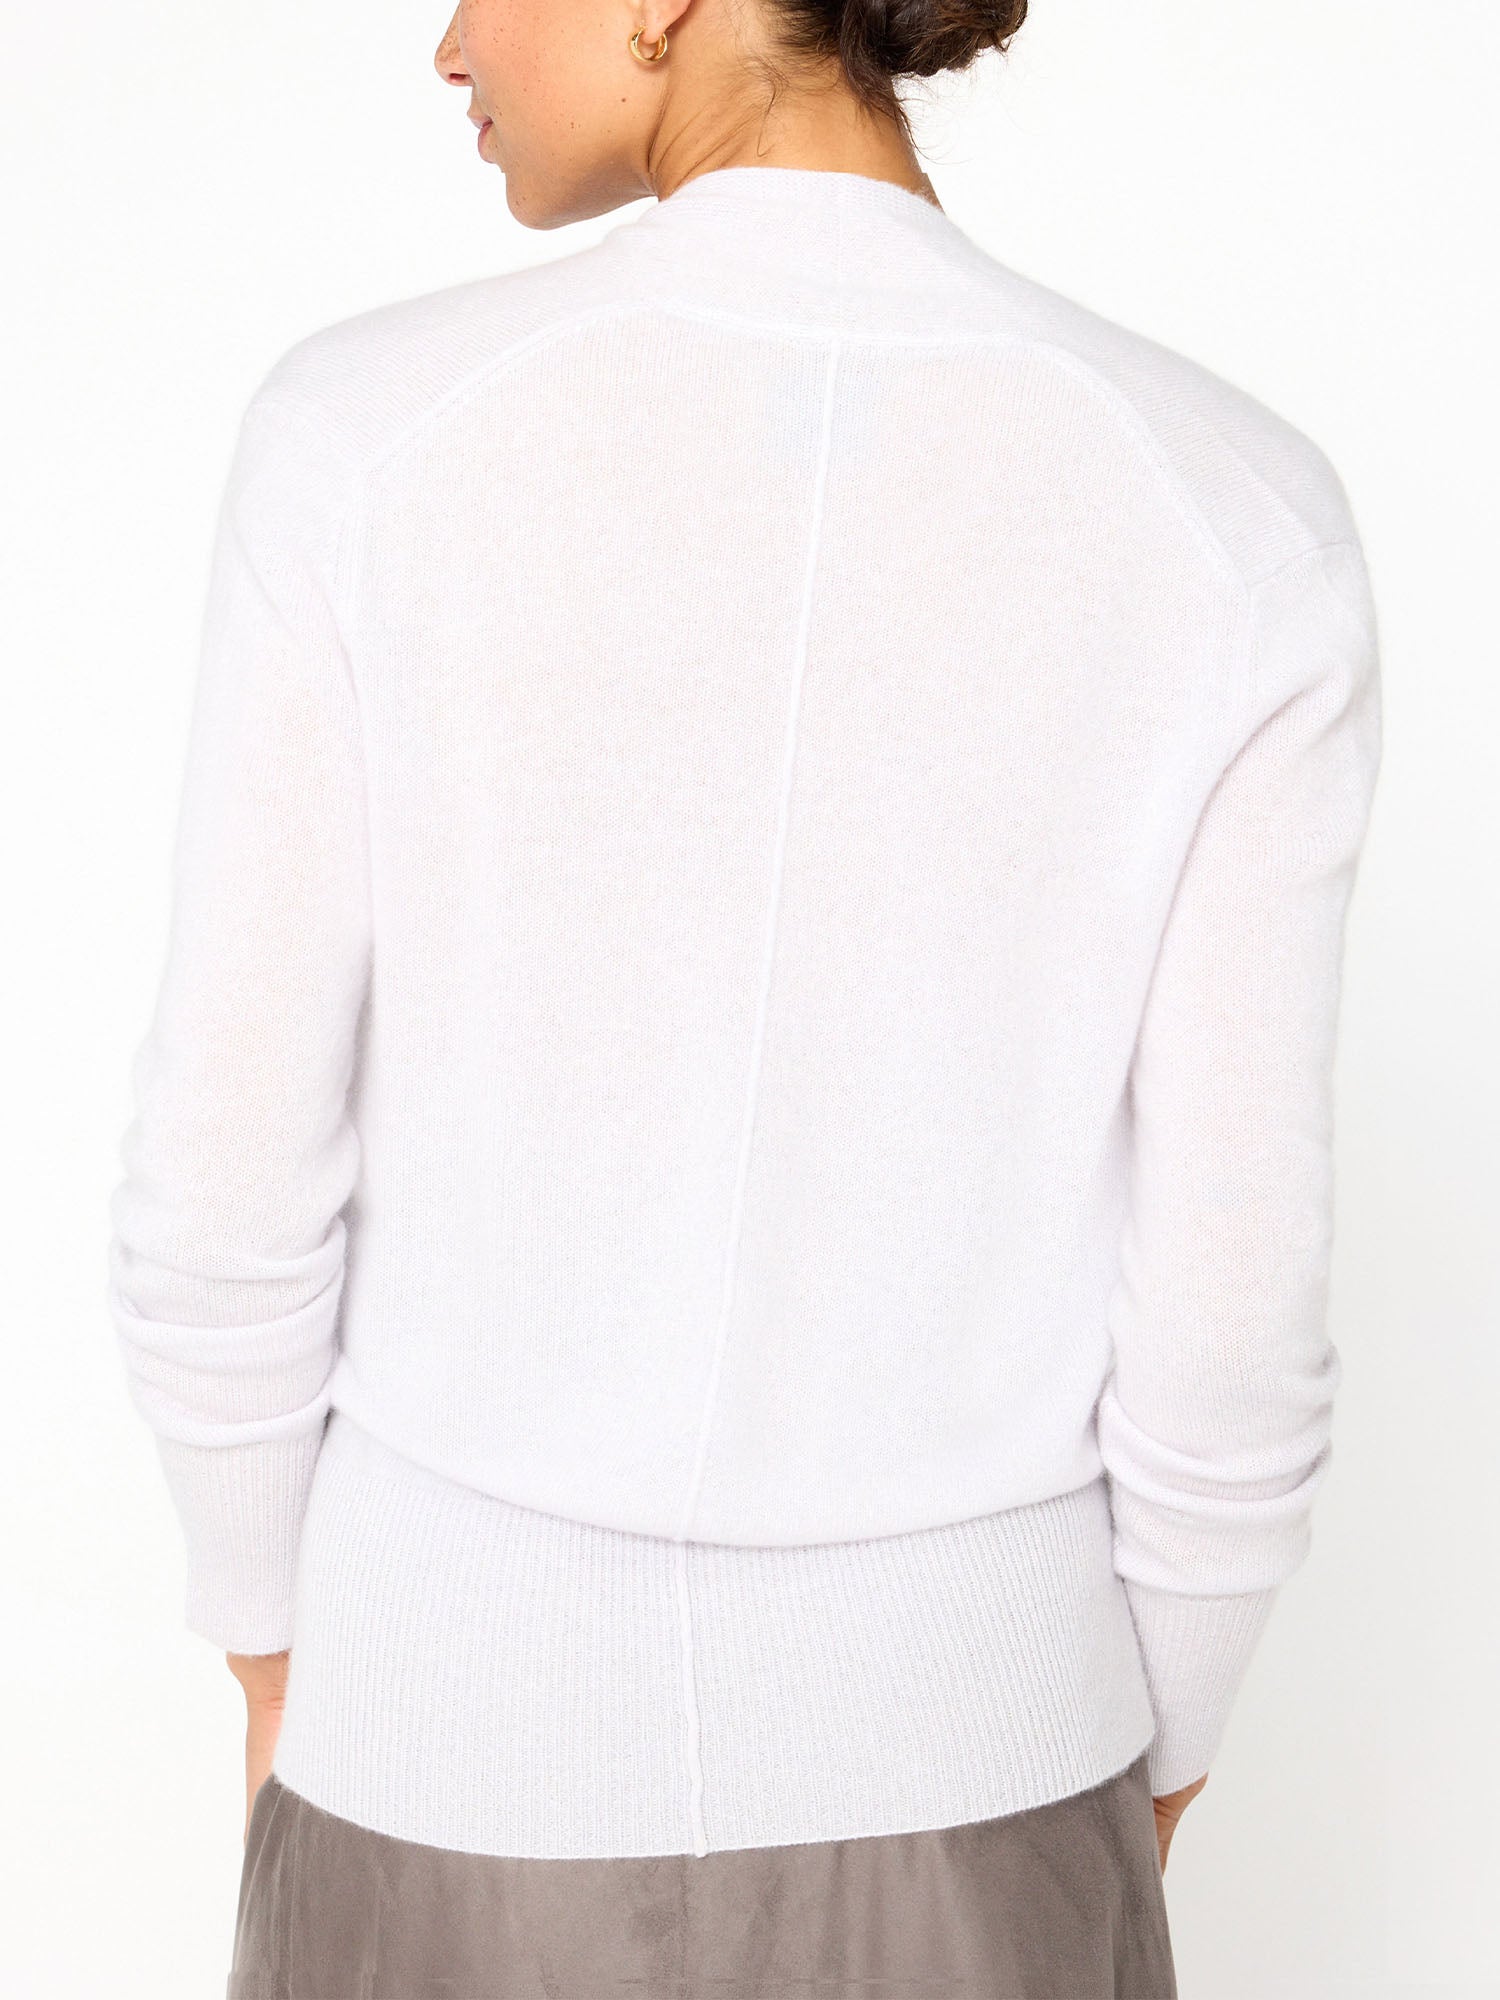 Phinneas cashmere v-neck white wrap sweater back view